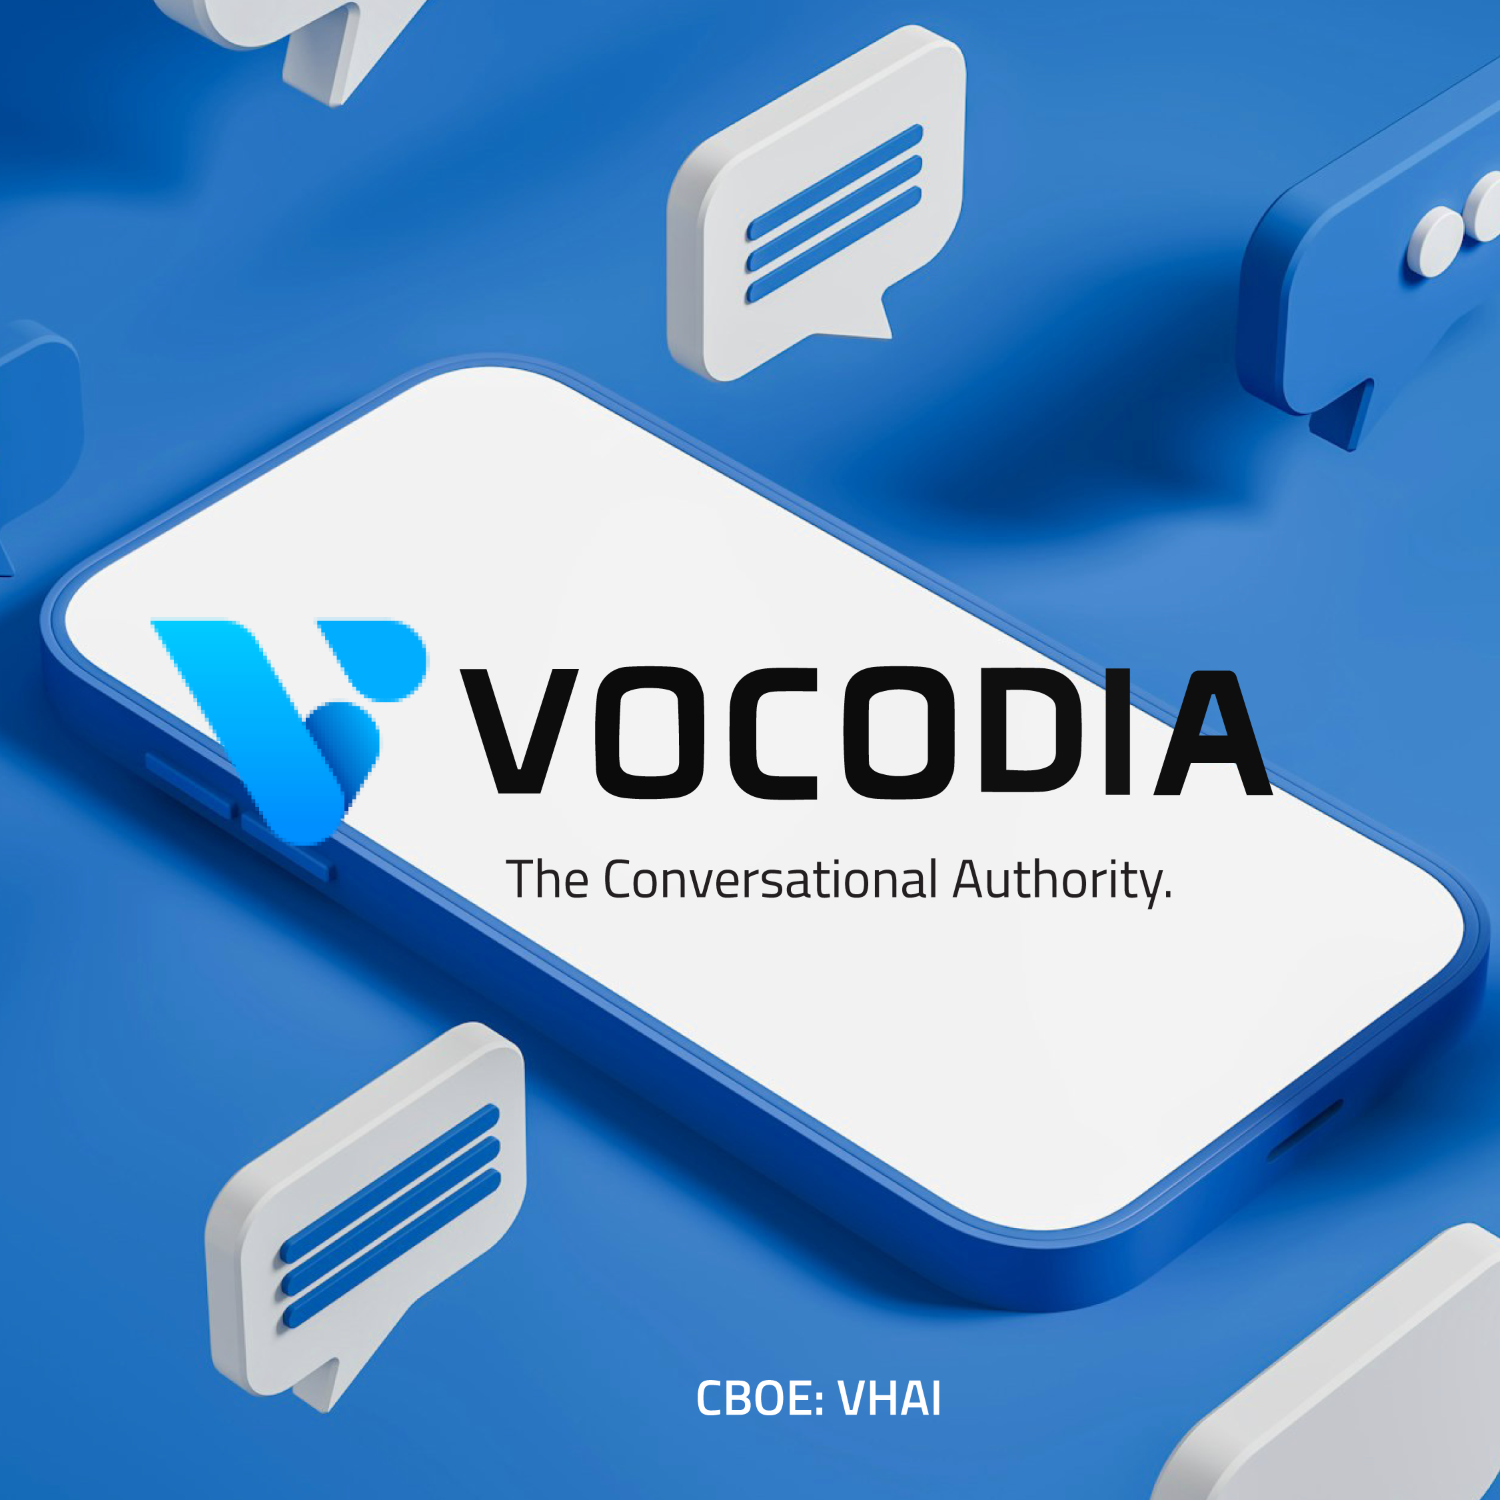 Vocodia Stock Captures Investor Attention As Conversational-AI Products Take Center Stage Among “Magnificent Seven” ($VHAI)